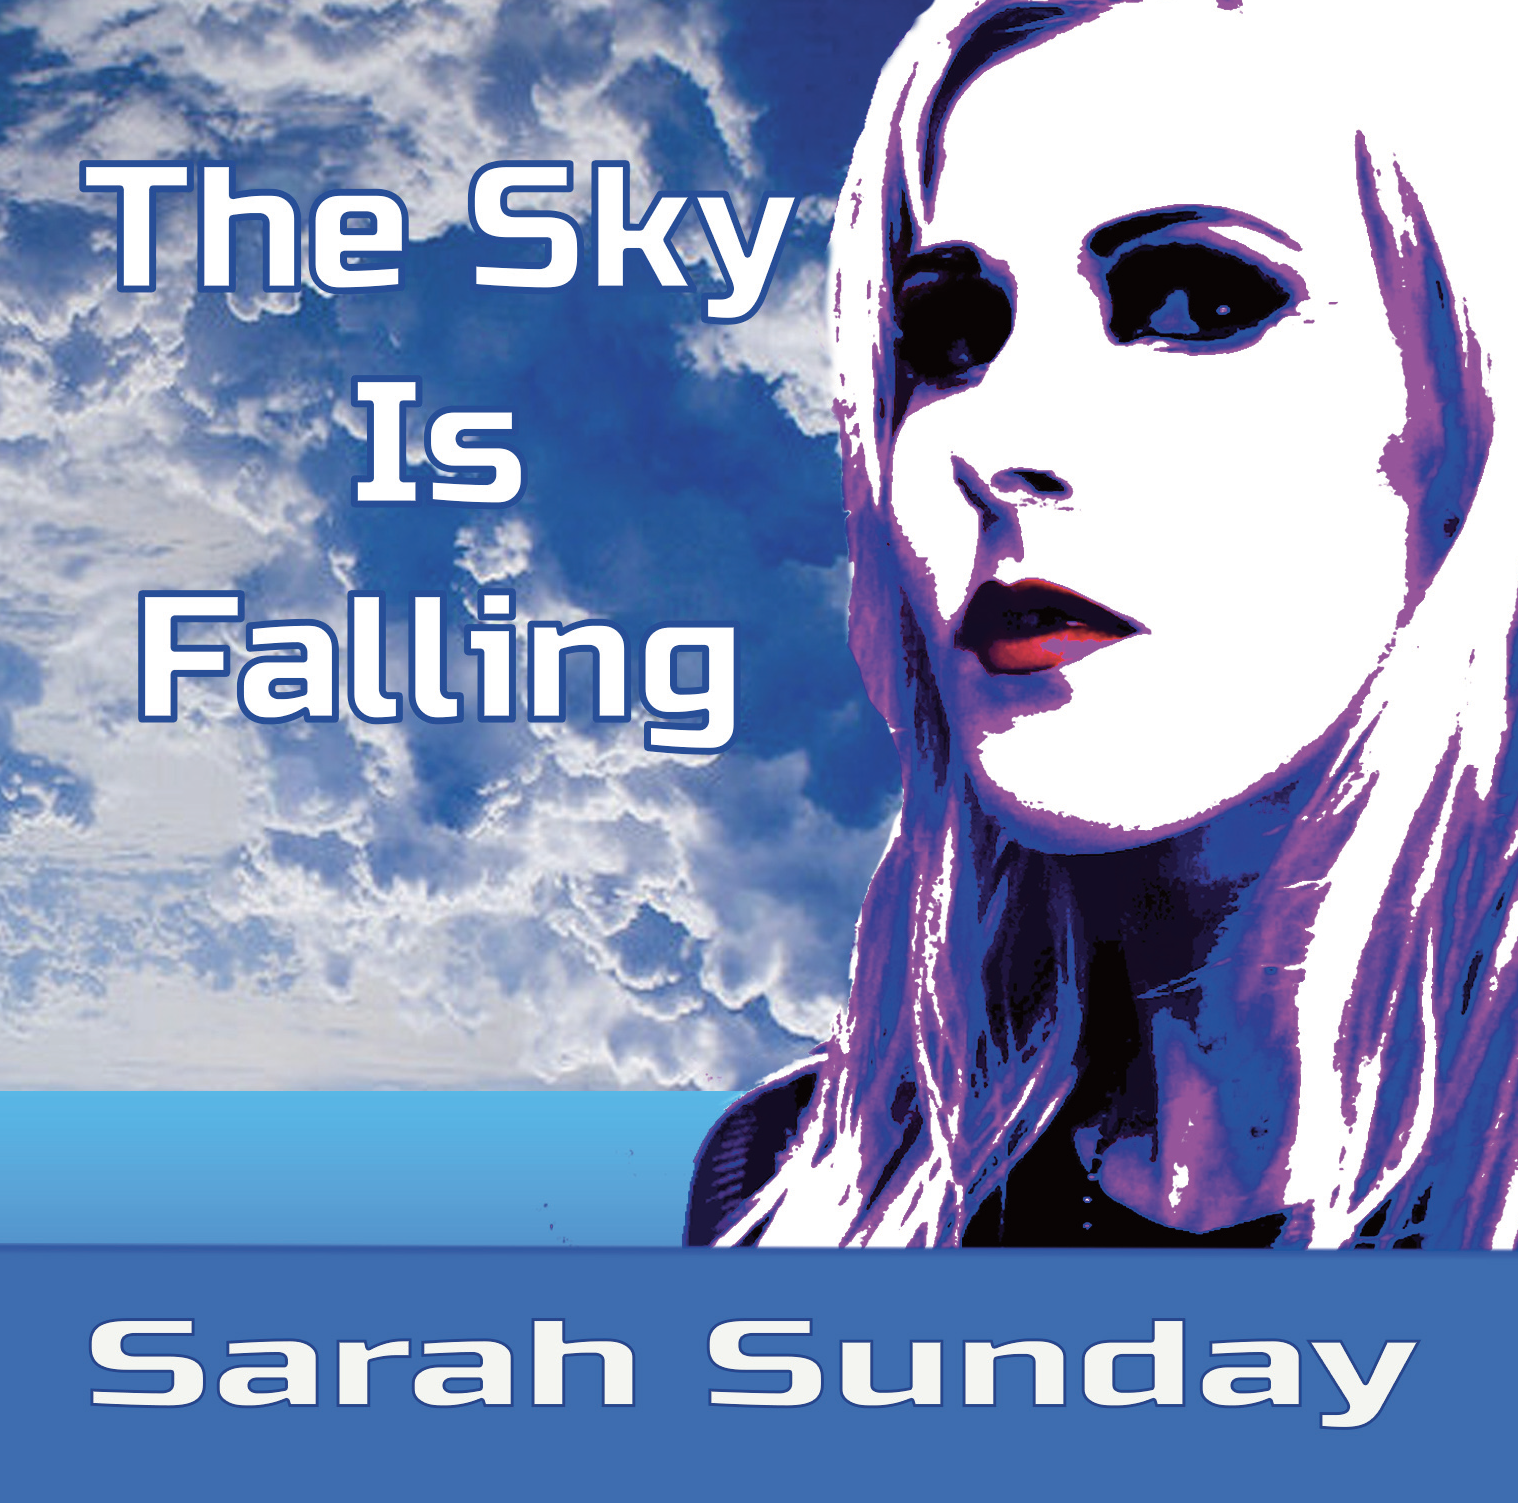 Sarah Sunday new single "The Sky is Falling" official Cover image